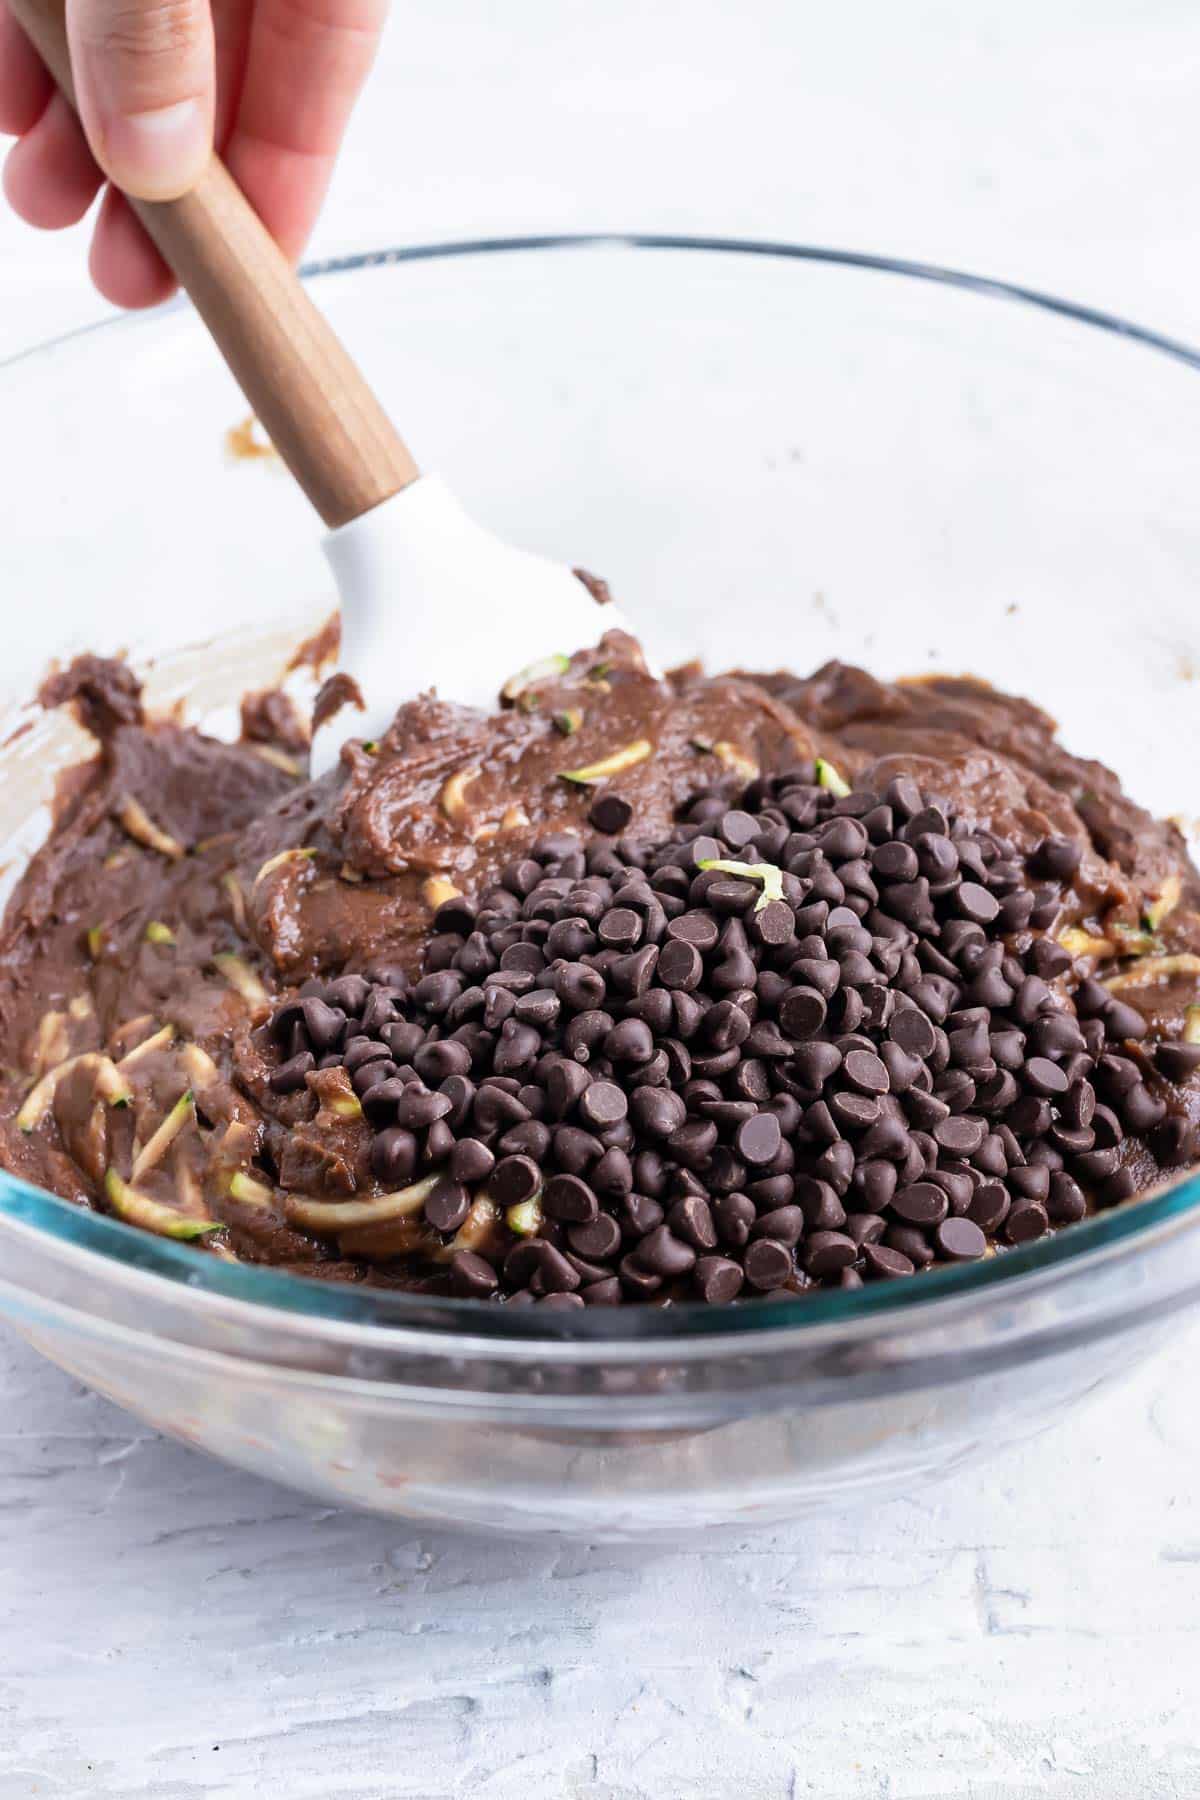 The chocolate chips are stirred in.